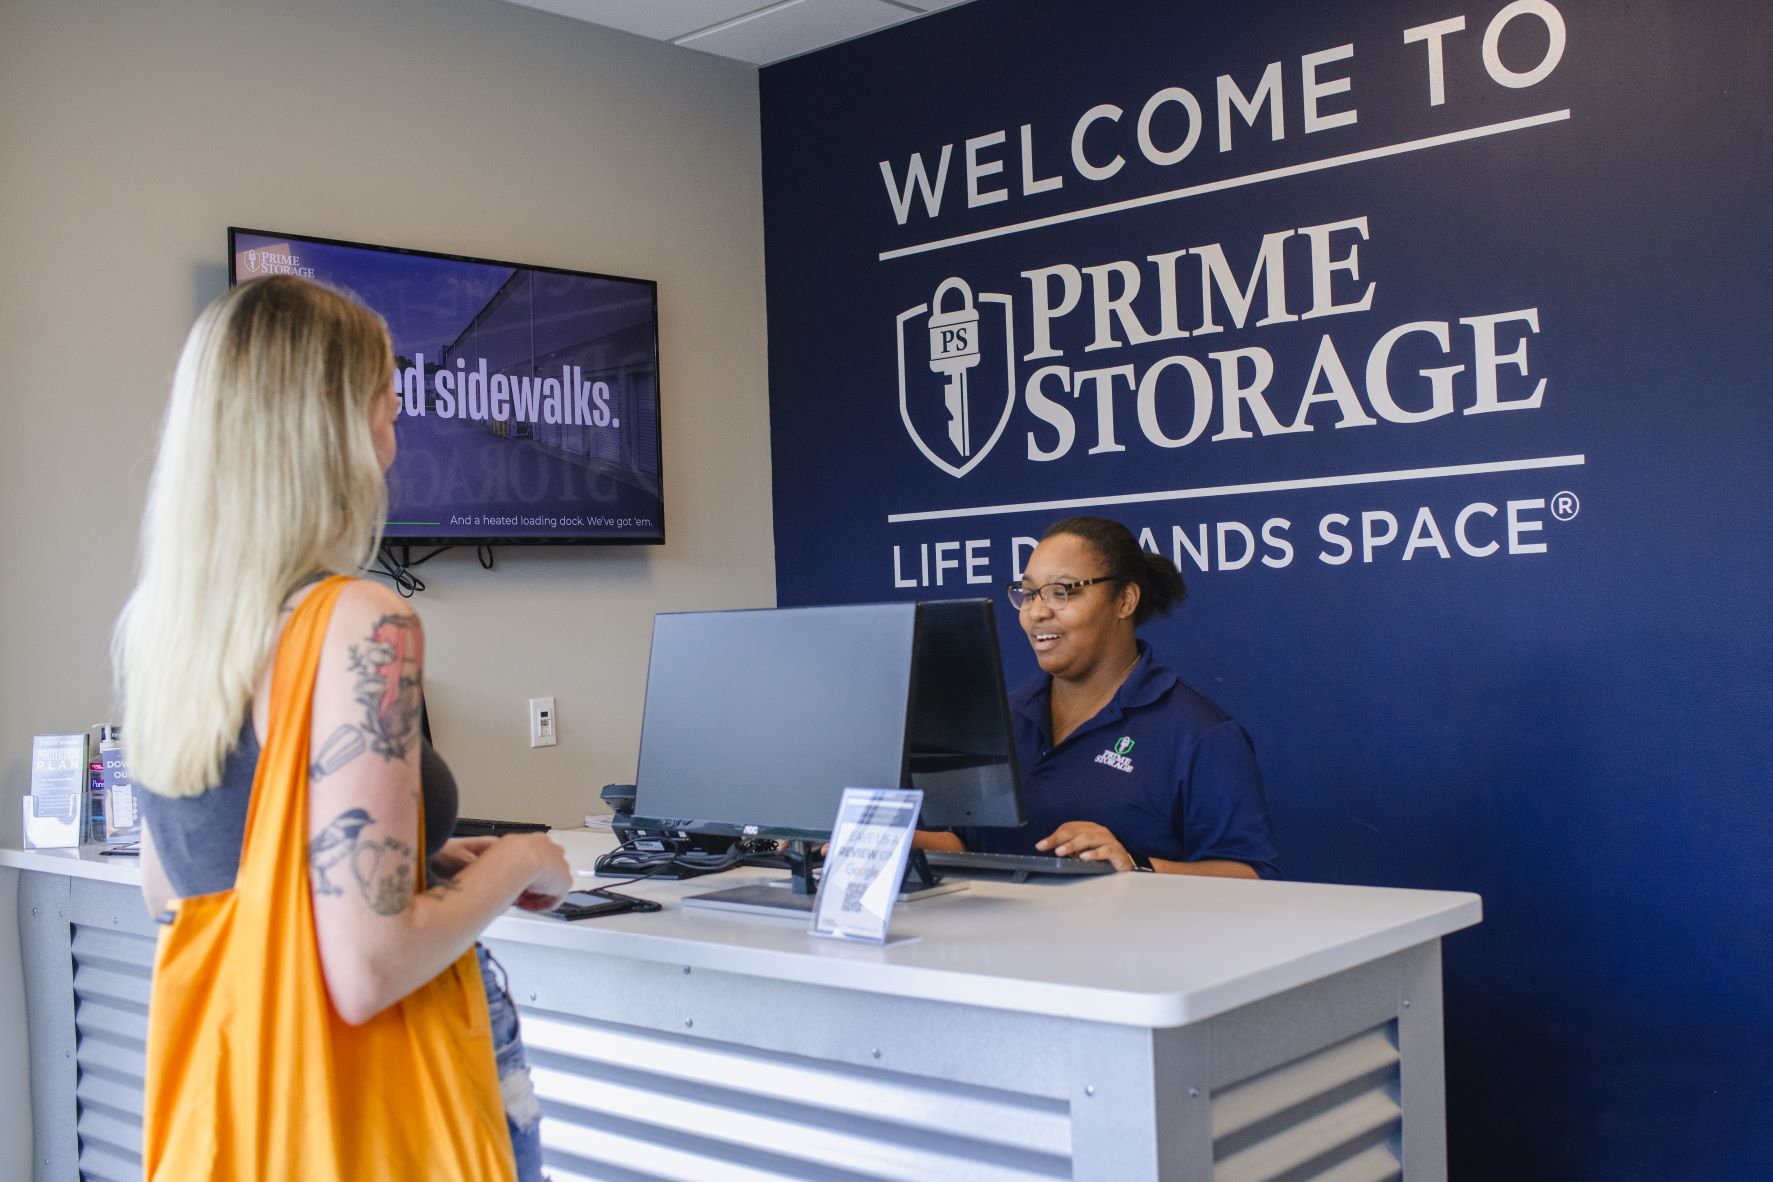 Welcoming, helpful staff to get you in the perfect unit!